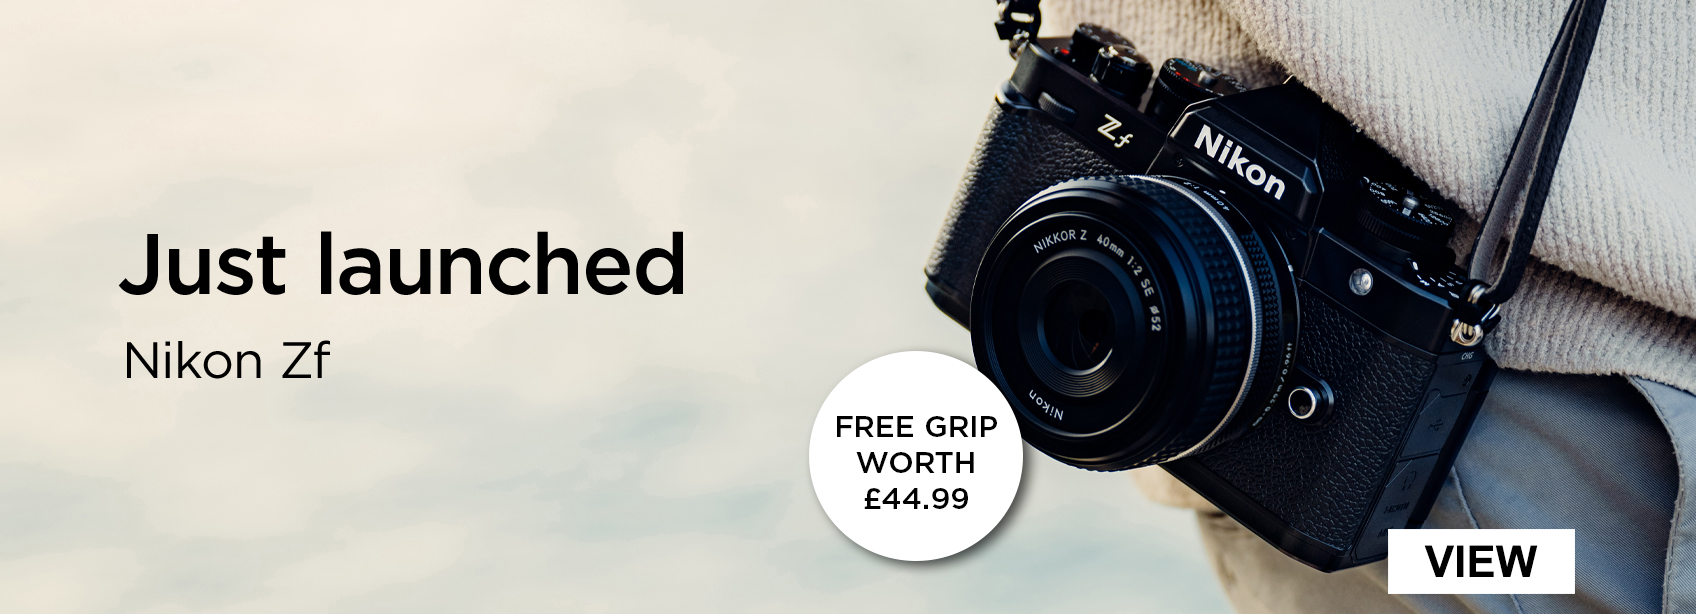 Just launched. Nikon Zf. Free grip worth £44.99